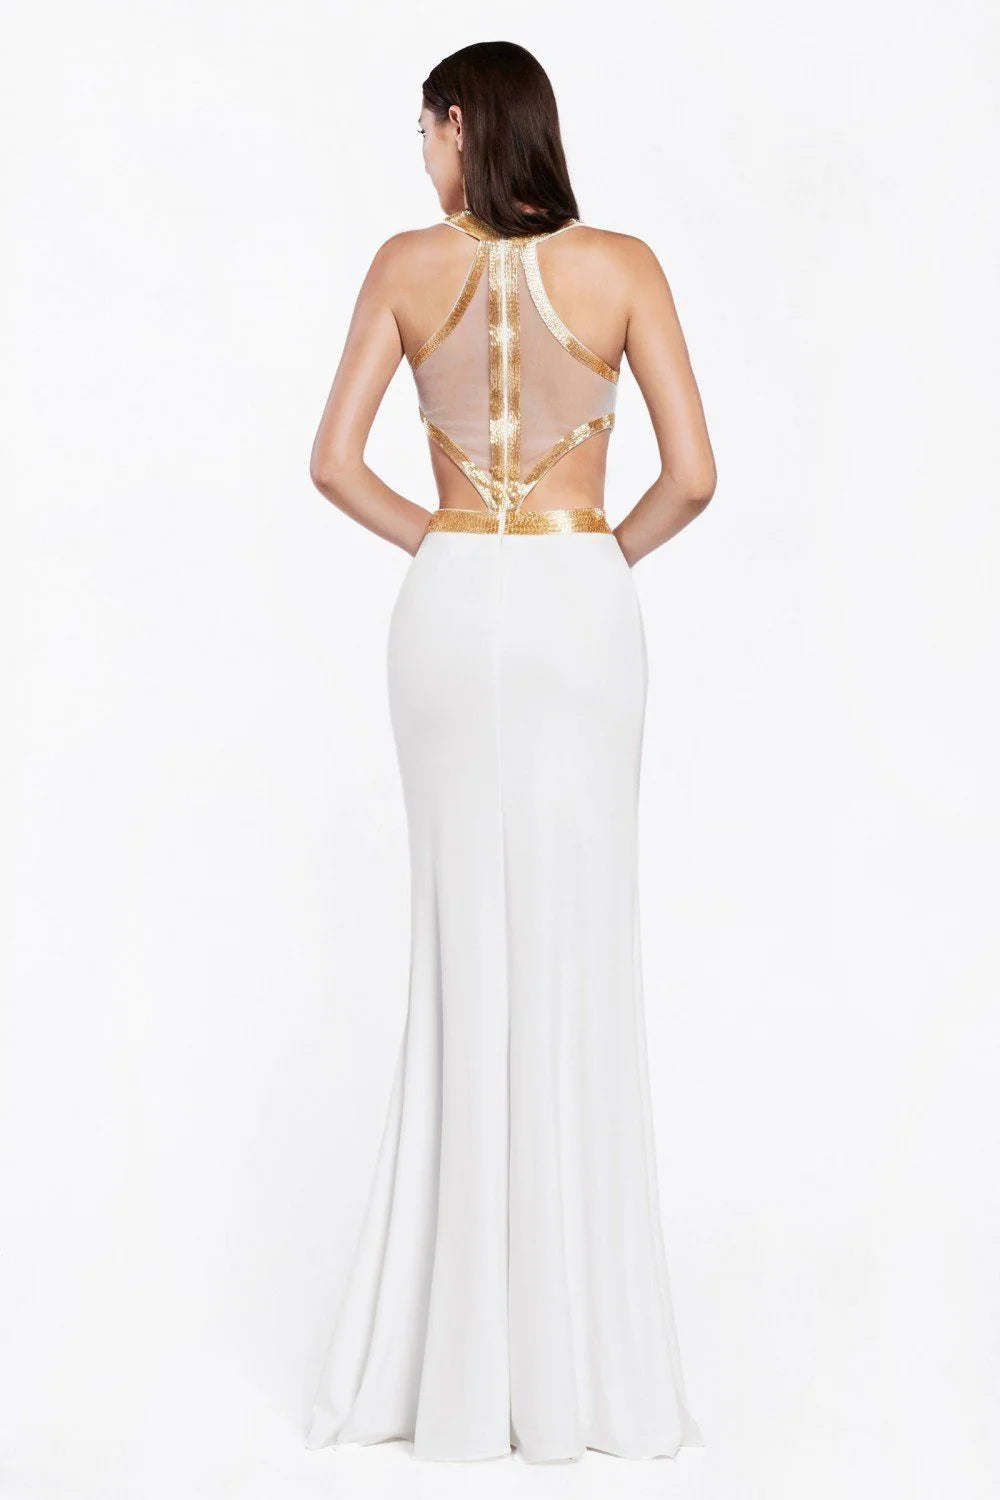 Expertly crafted, the Ladivine J735 Liquid Beaded Formal Dress is a stunning choice for any formal occasion. The high neck and cut out sides add a touch of modern elegance, while the jersey fabric flatters the figure. Stand out with the intricate beading and feel confident with the comfortable fit.